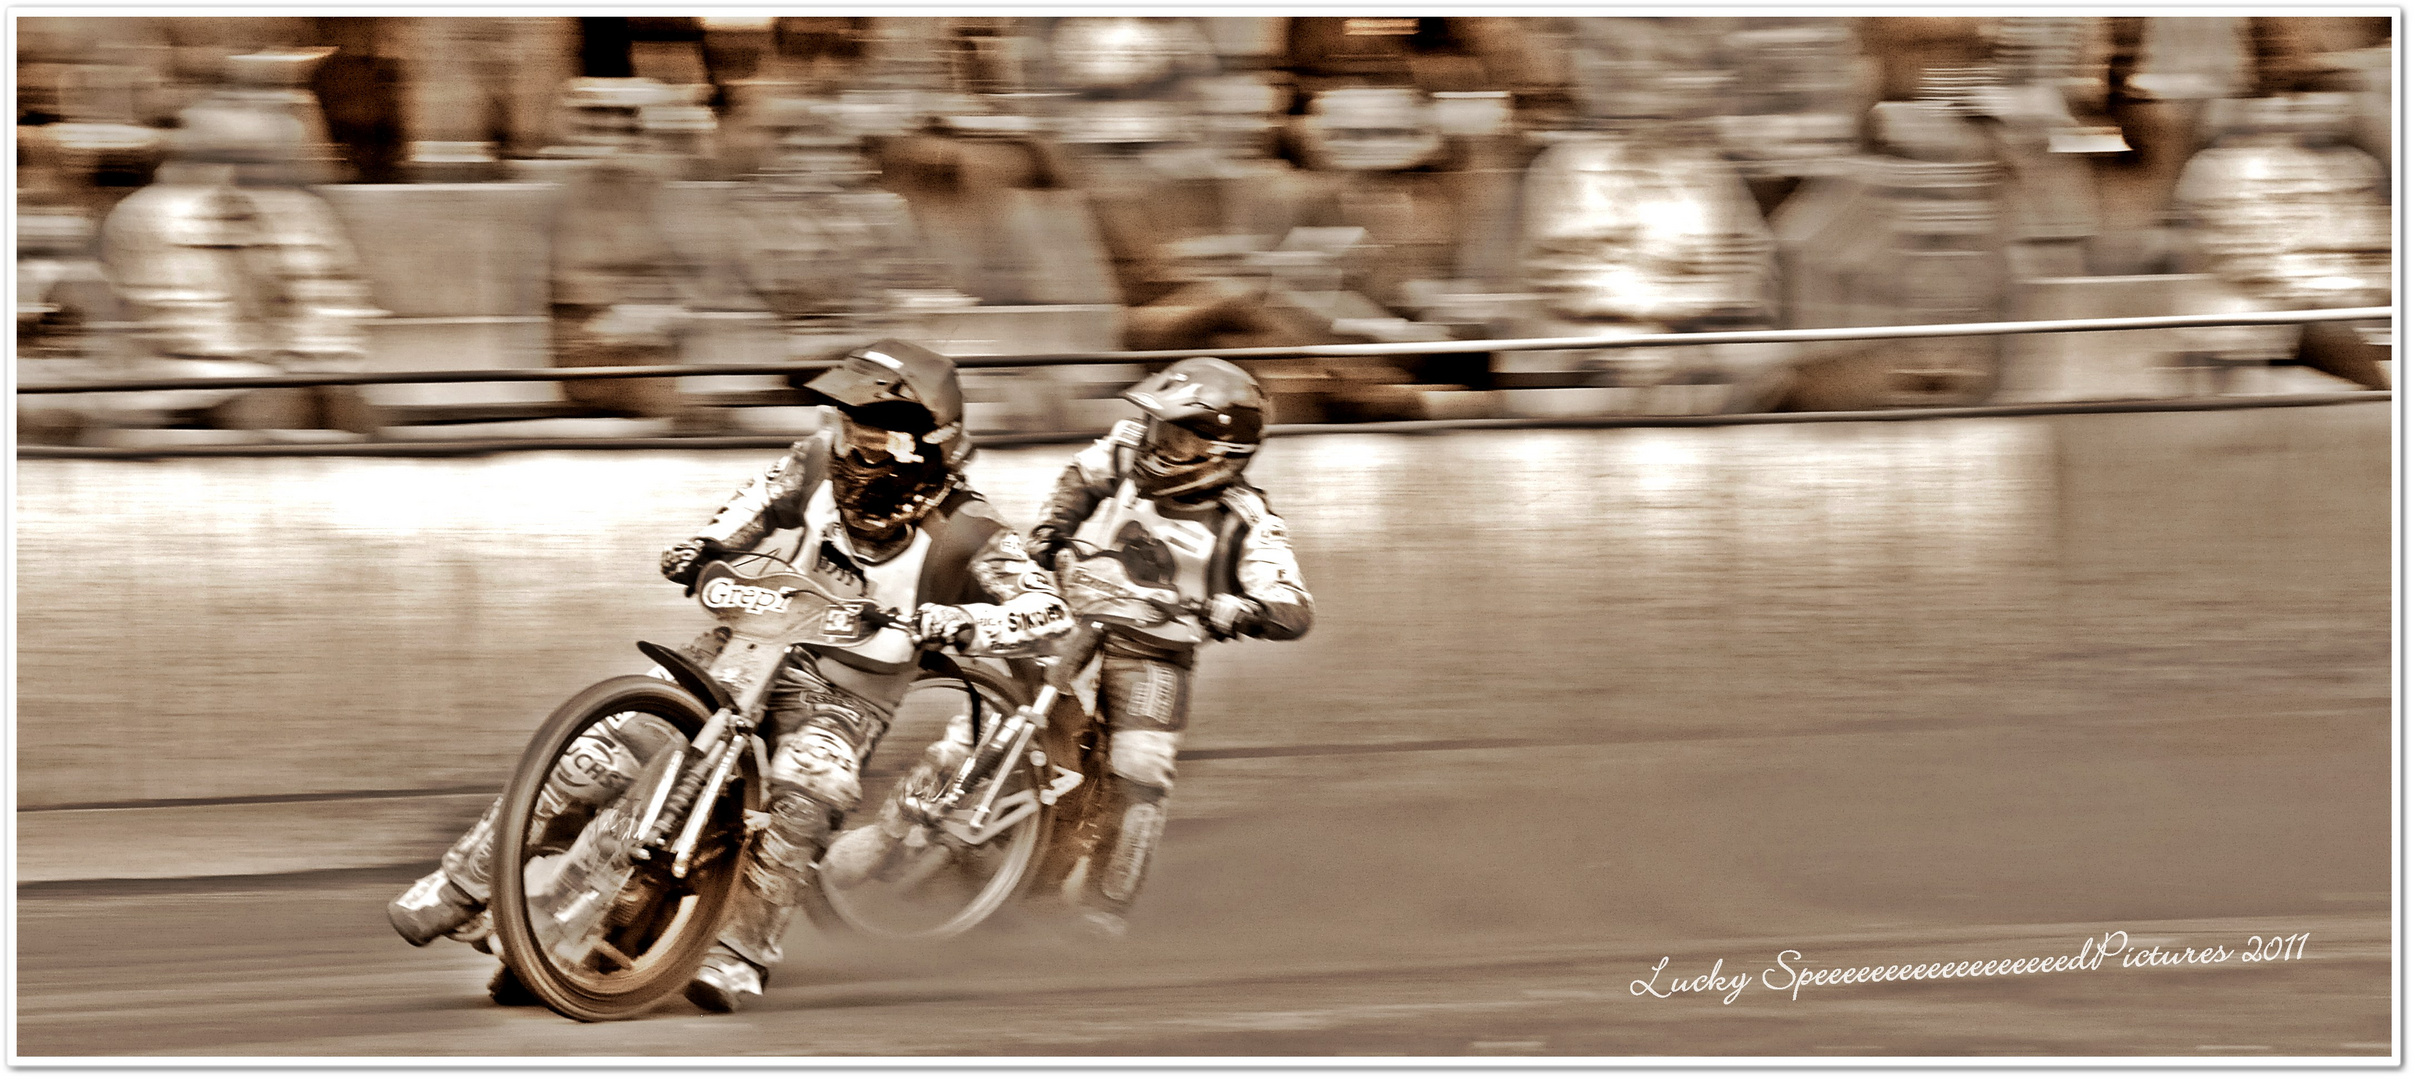 Duell in Sepia - speed is back (02/2011)